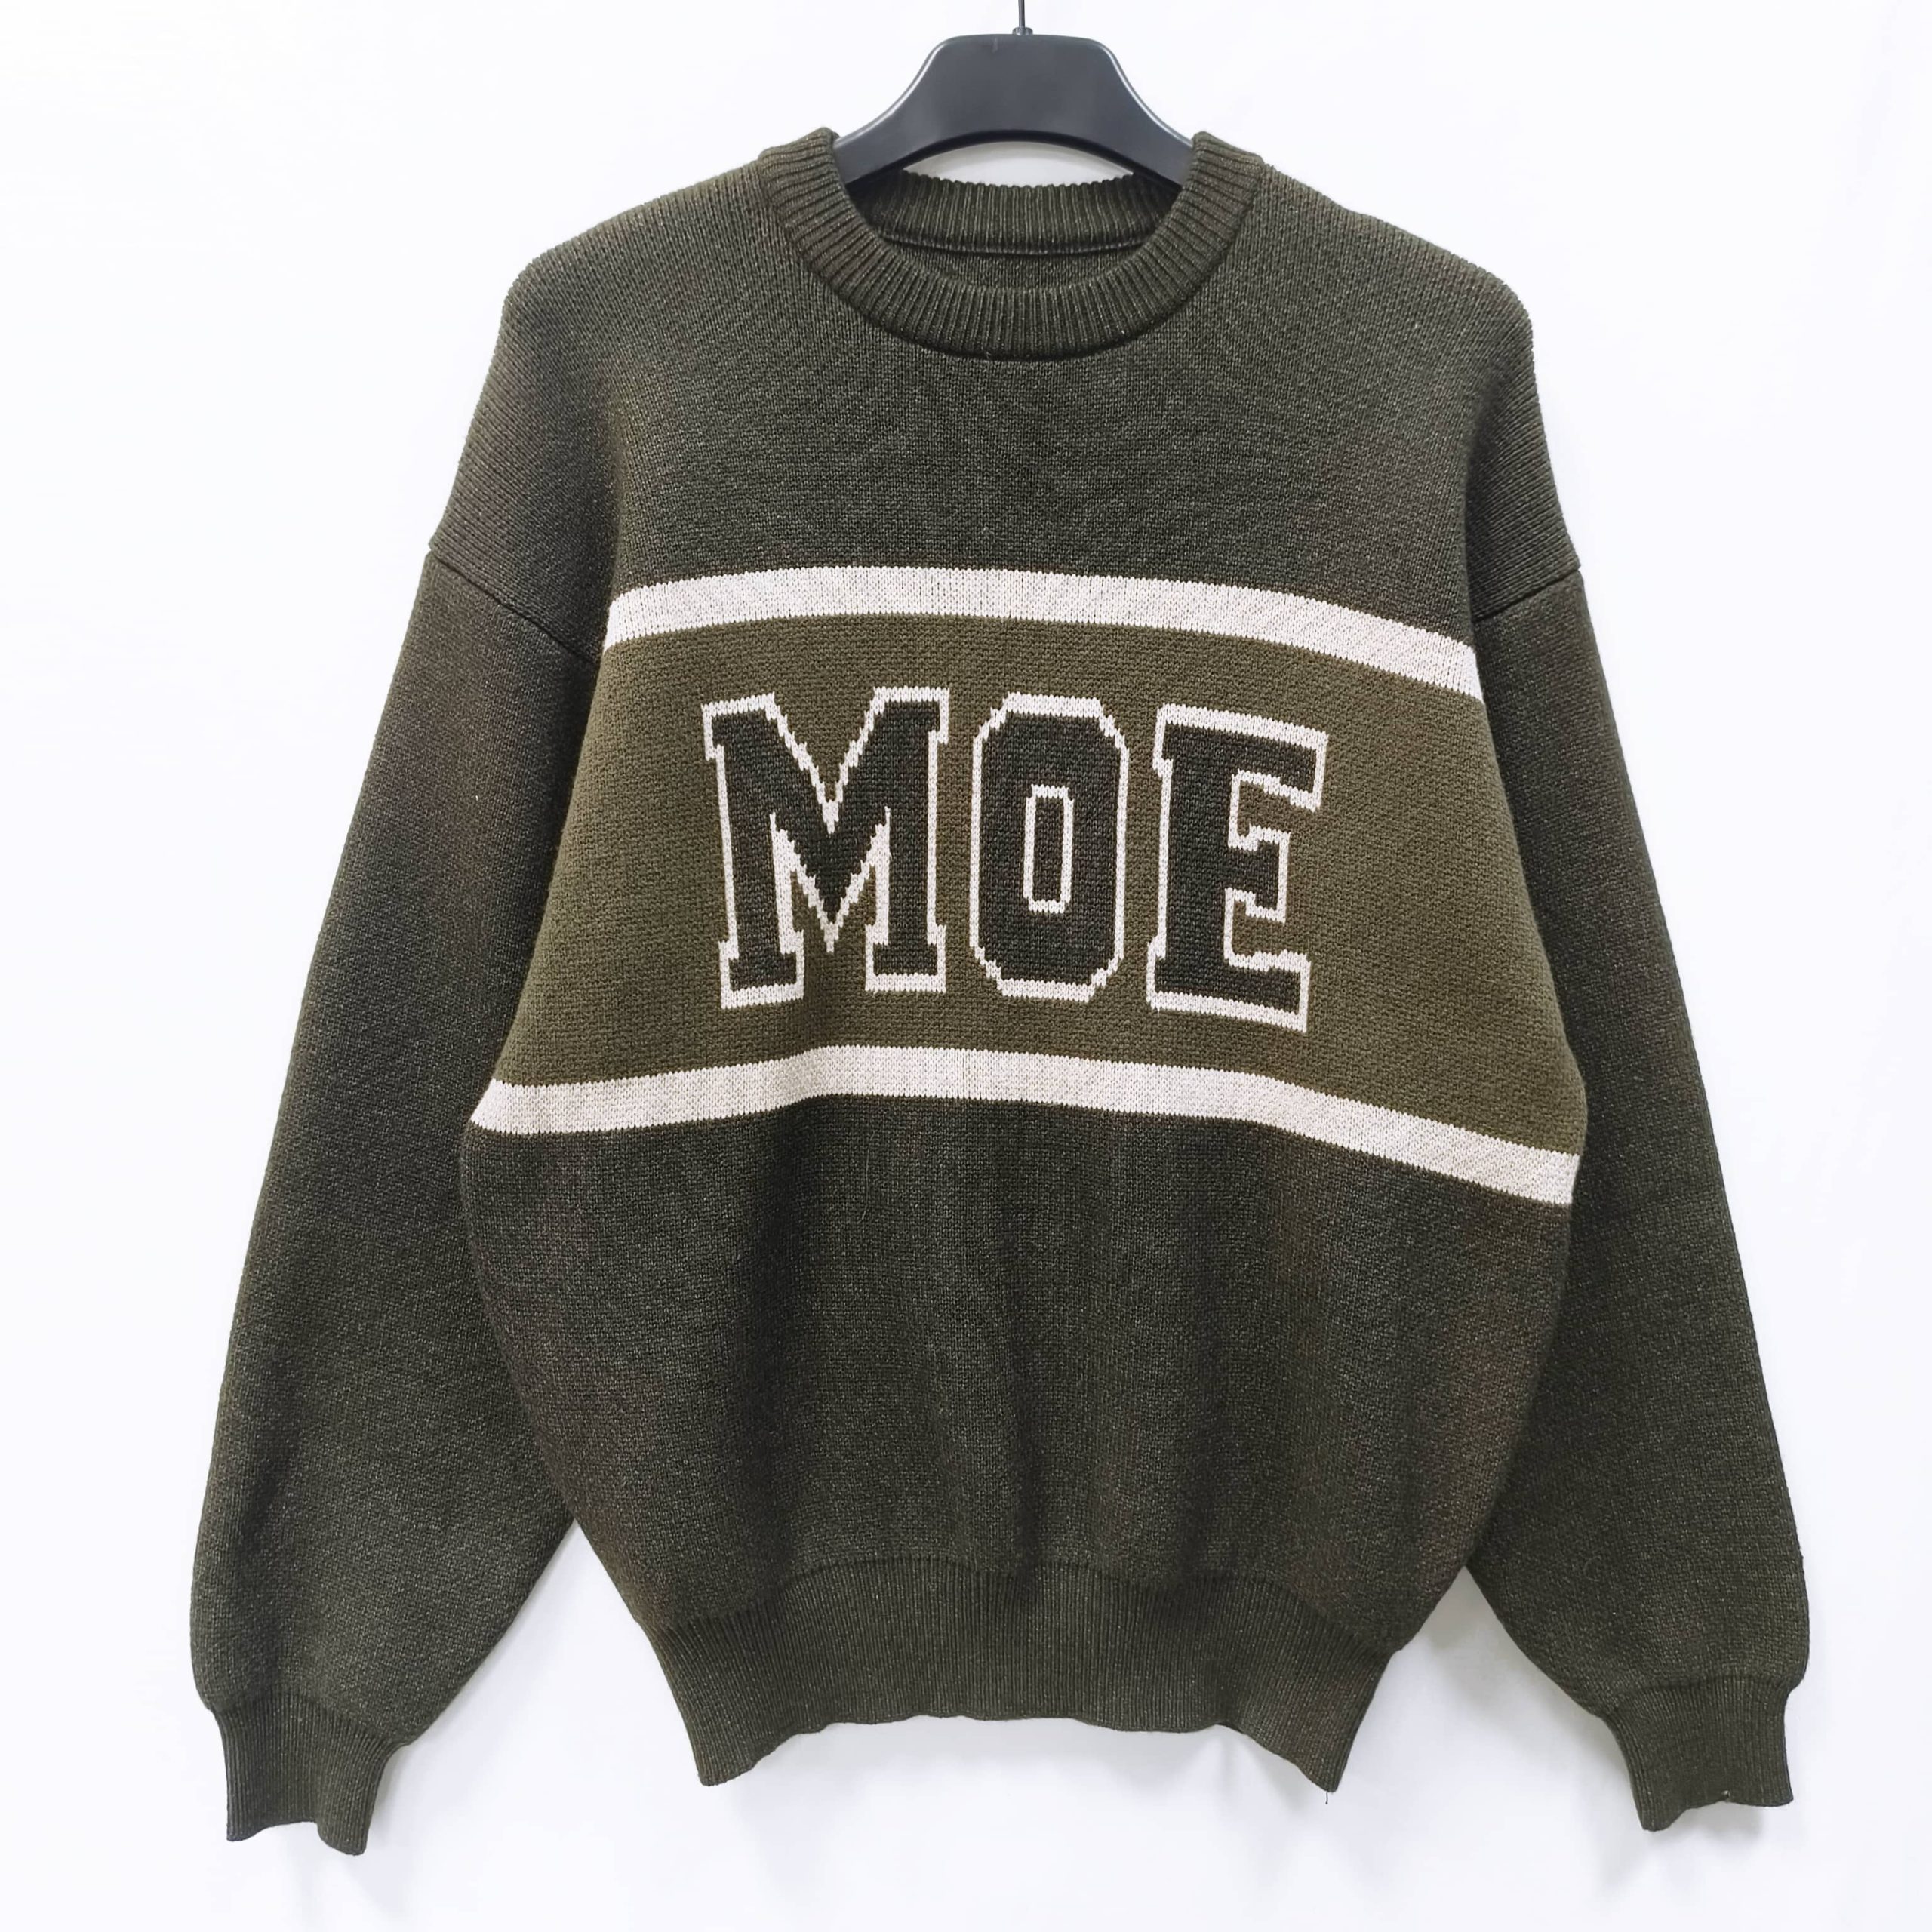 Men's letter jacquard pullover sweater, Chinese sweater manufacturing factory